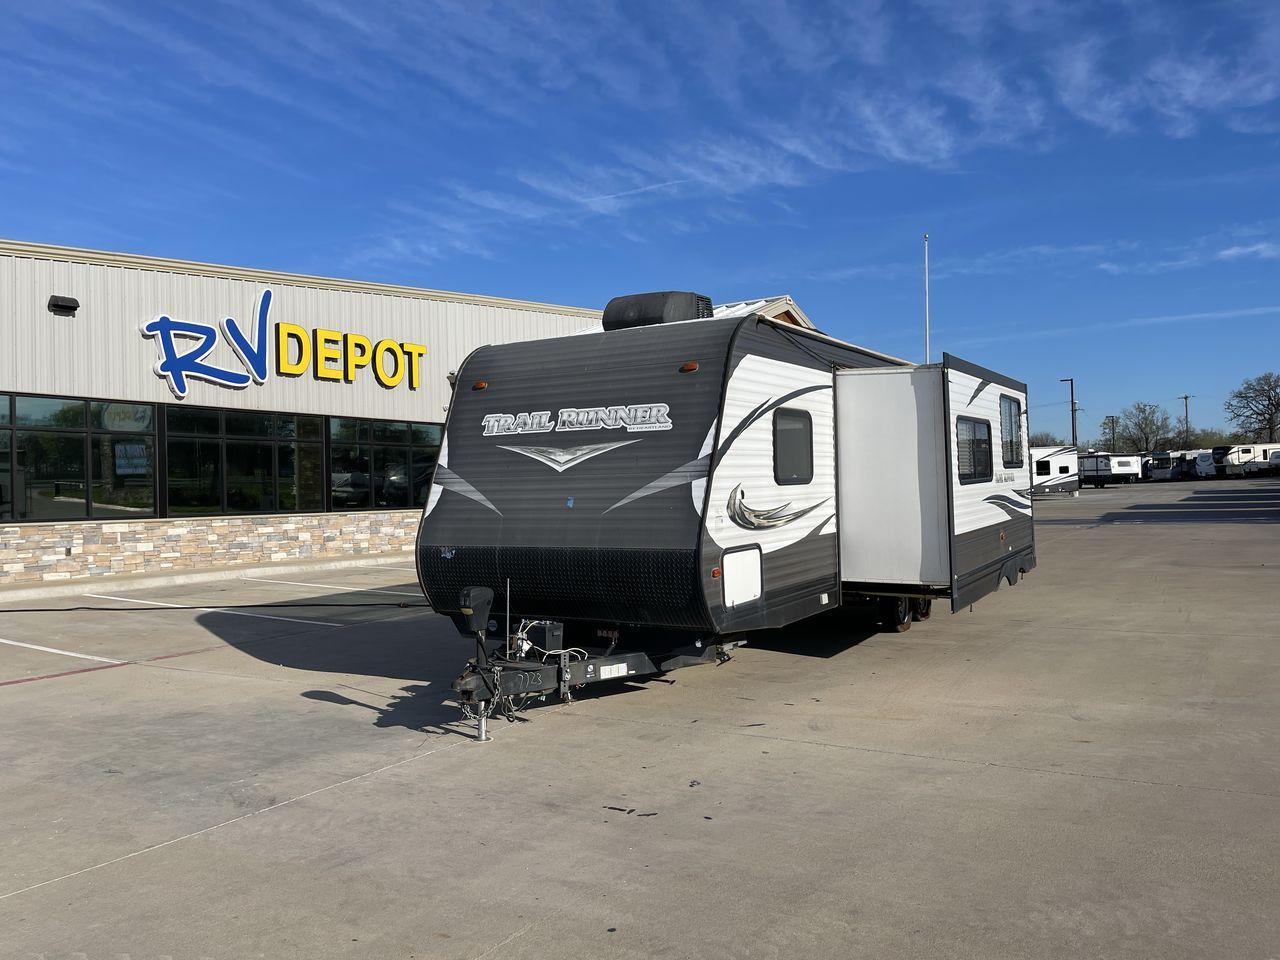 2017 HEARTLAND TRAILRUNNER 27FQBS (5SFEB3029HE) , Length: 30.58 ft. | Dry Weight: 6,081 lbs. | Gross Weight: 7,700 lbs. | Slides: 1 transmission, located at 4319 N Main Street, Cleburne, TX, 76033, (817) 221-0660, 32.435829, -97.384178 - The 2017 Heartland Trail Runner 27FQBS is a versatile and well-designed travel trailer tailored for unforgettable outdoor adventures. Measuring 30 feet in length and boasting a dry weight of 6,081 lbs, this model offers a perfect balance of spaciousness and towing convenience. Built with a durable e - Photo #0